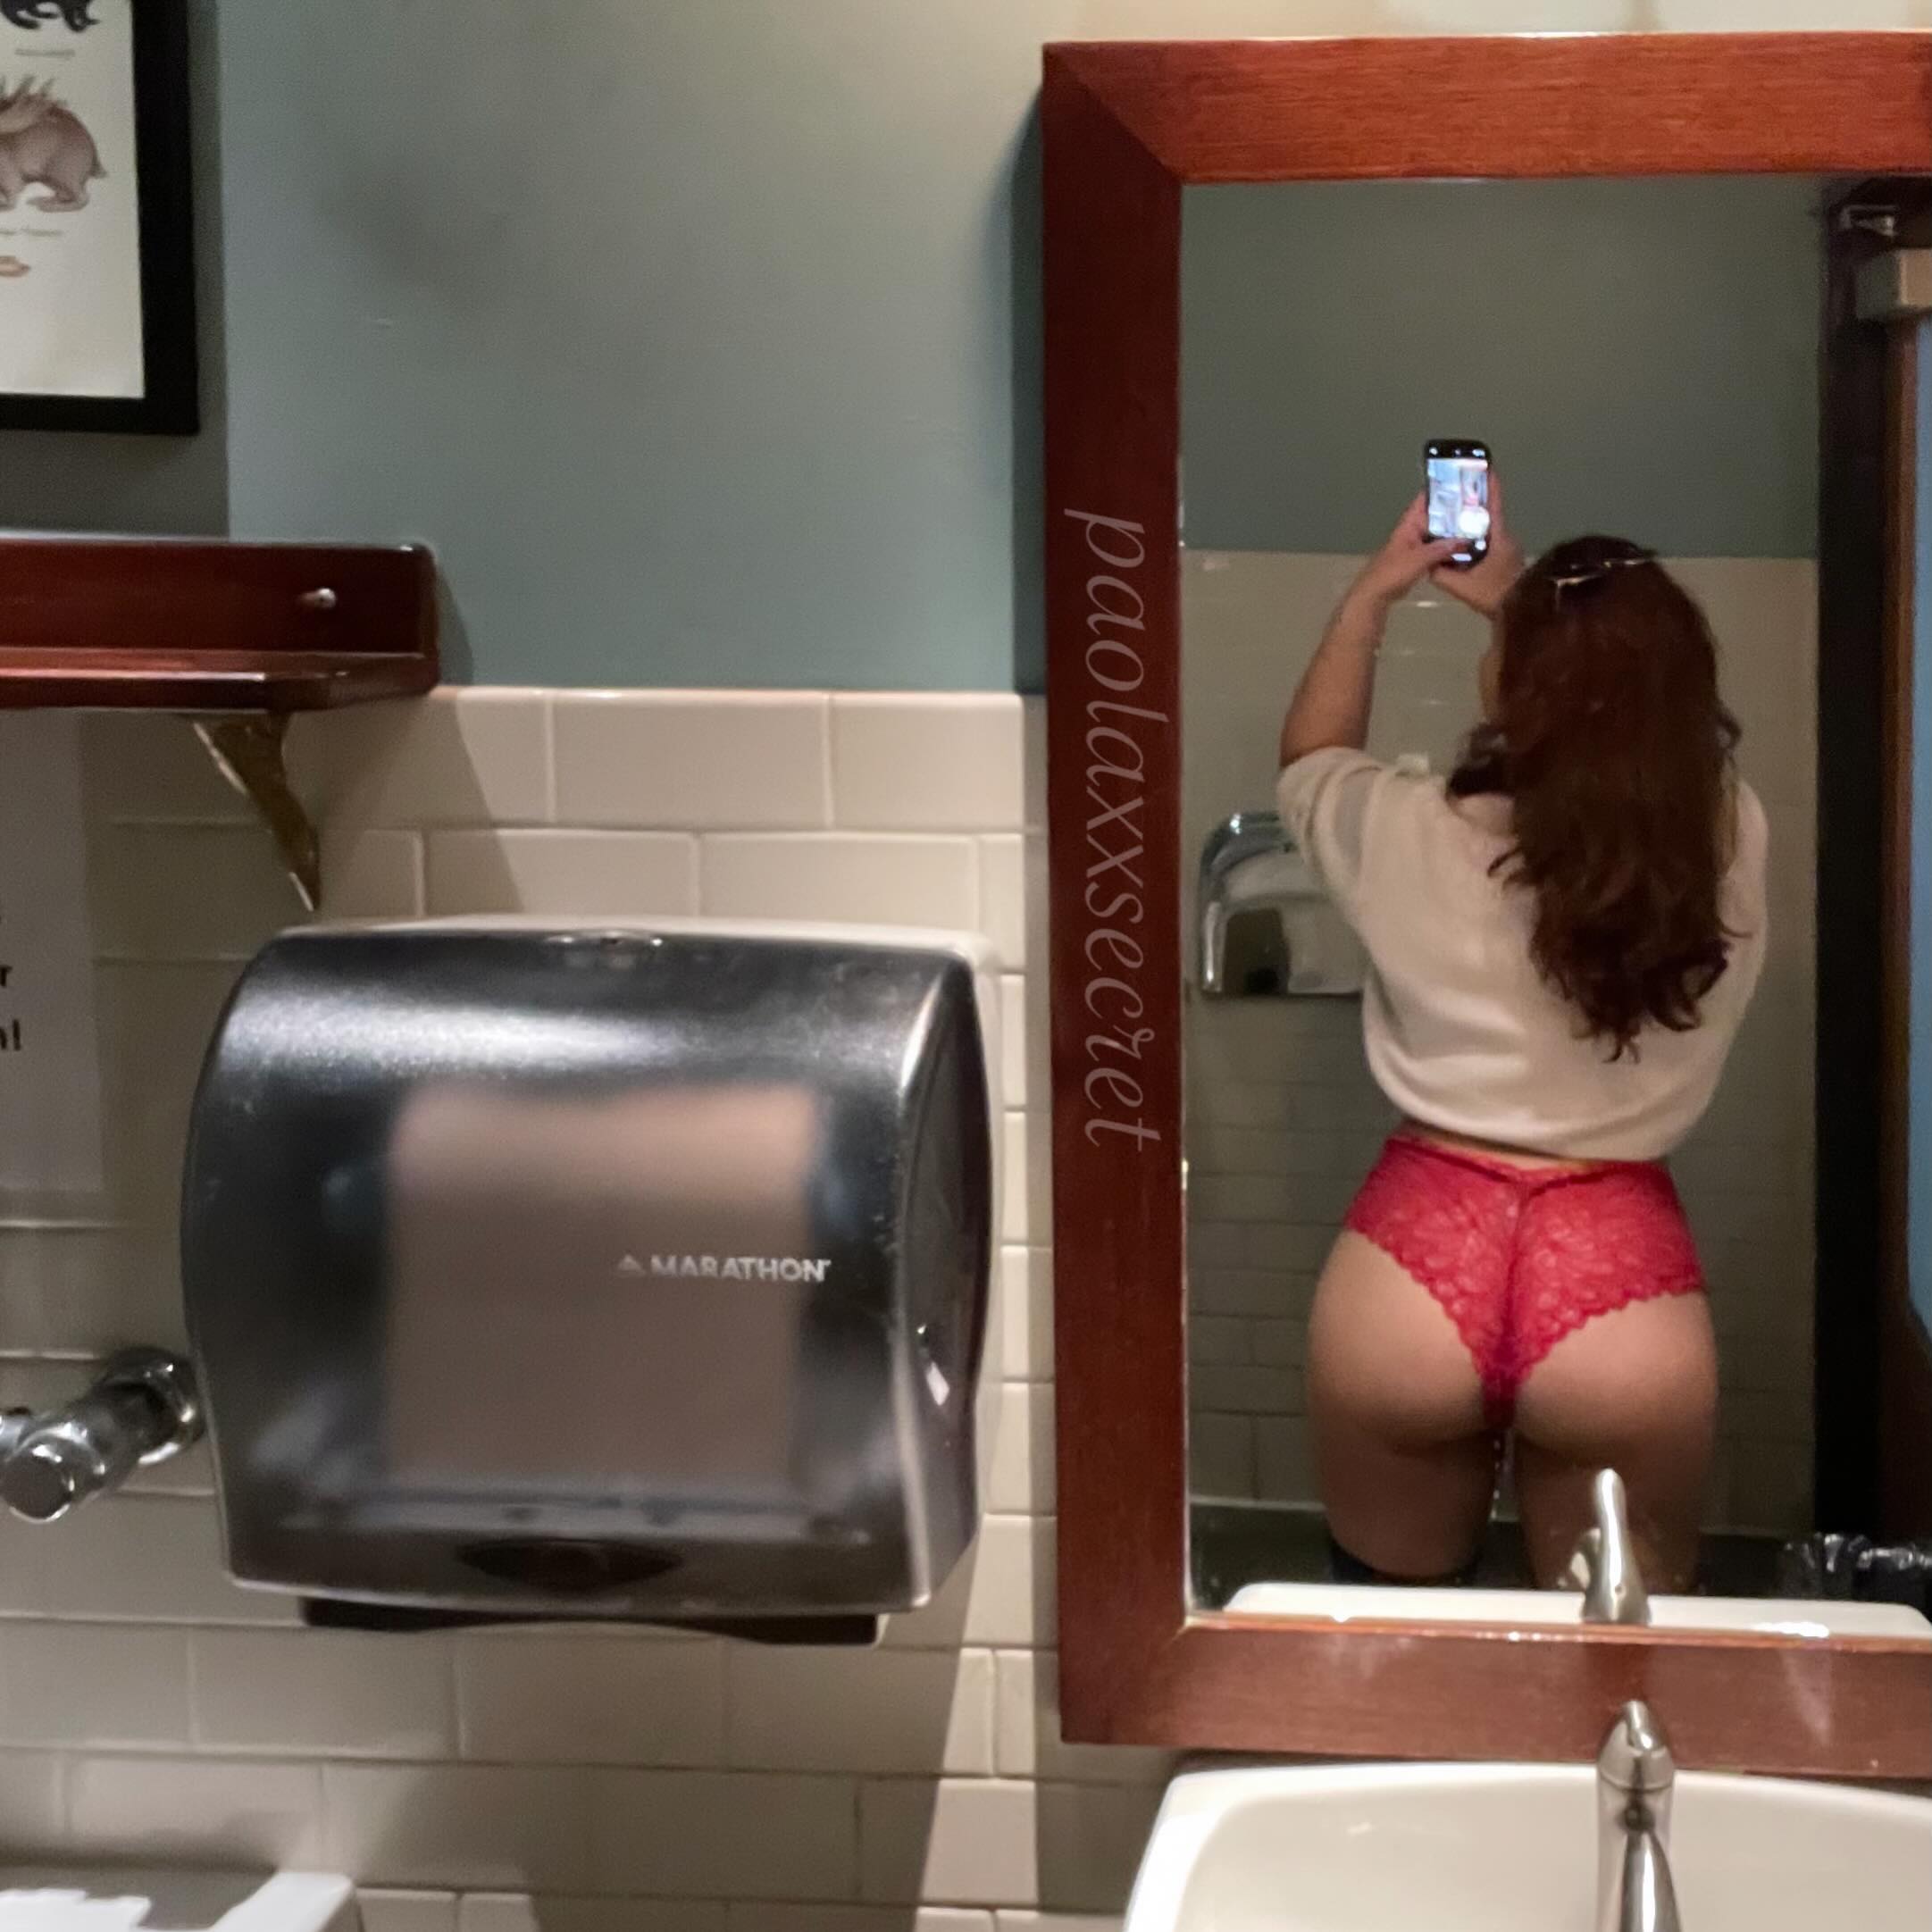 I can’t go to a public bathroom without taking some booty pics 🥴🍑 #trending #love #like #bootygainz #explorepage